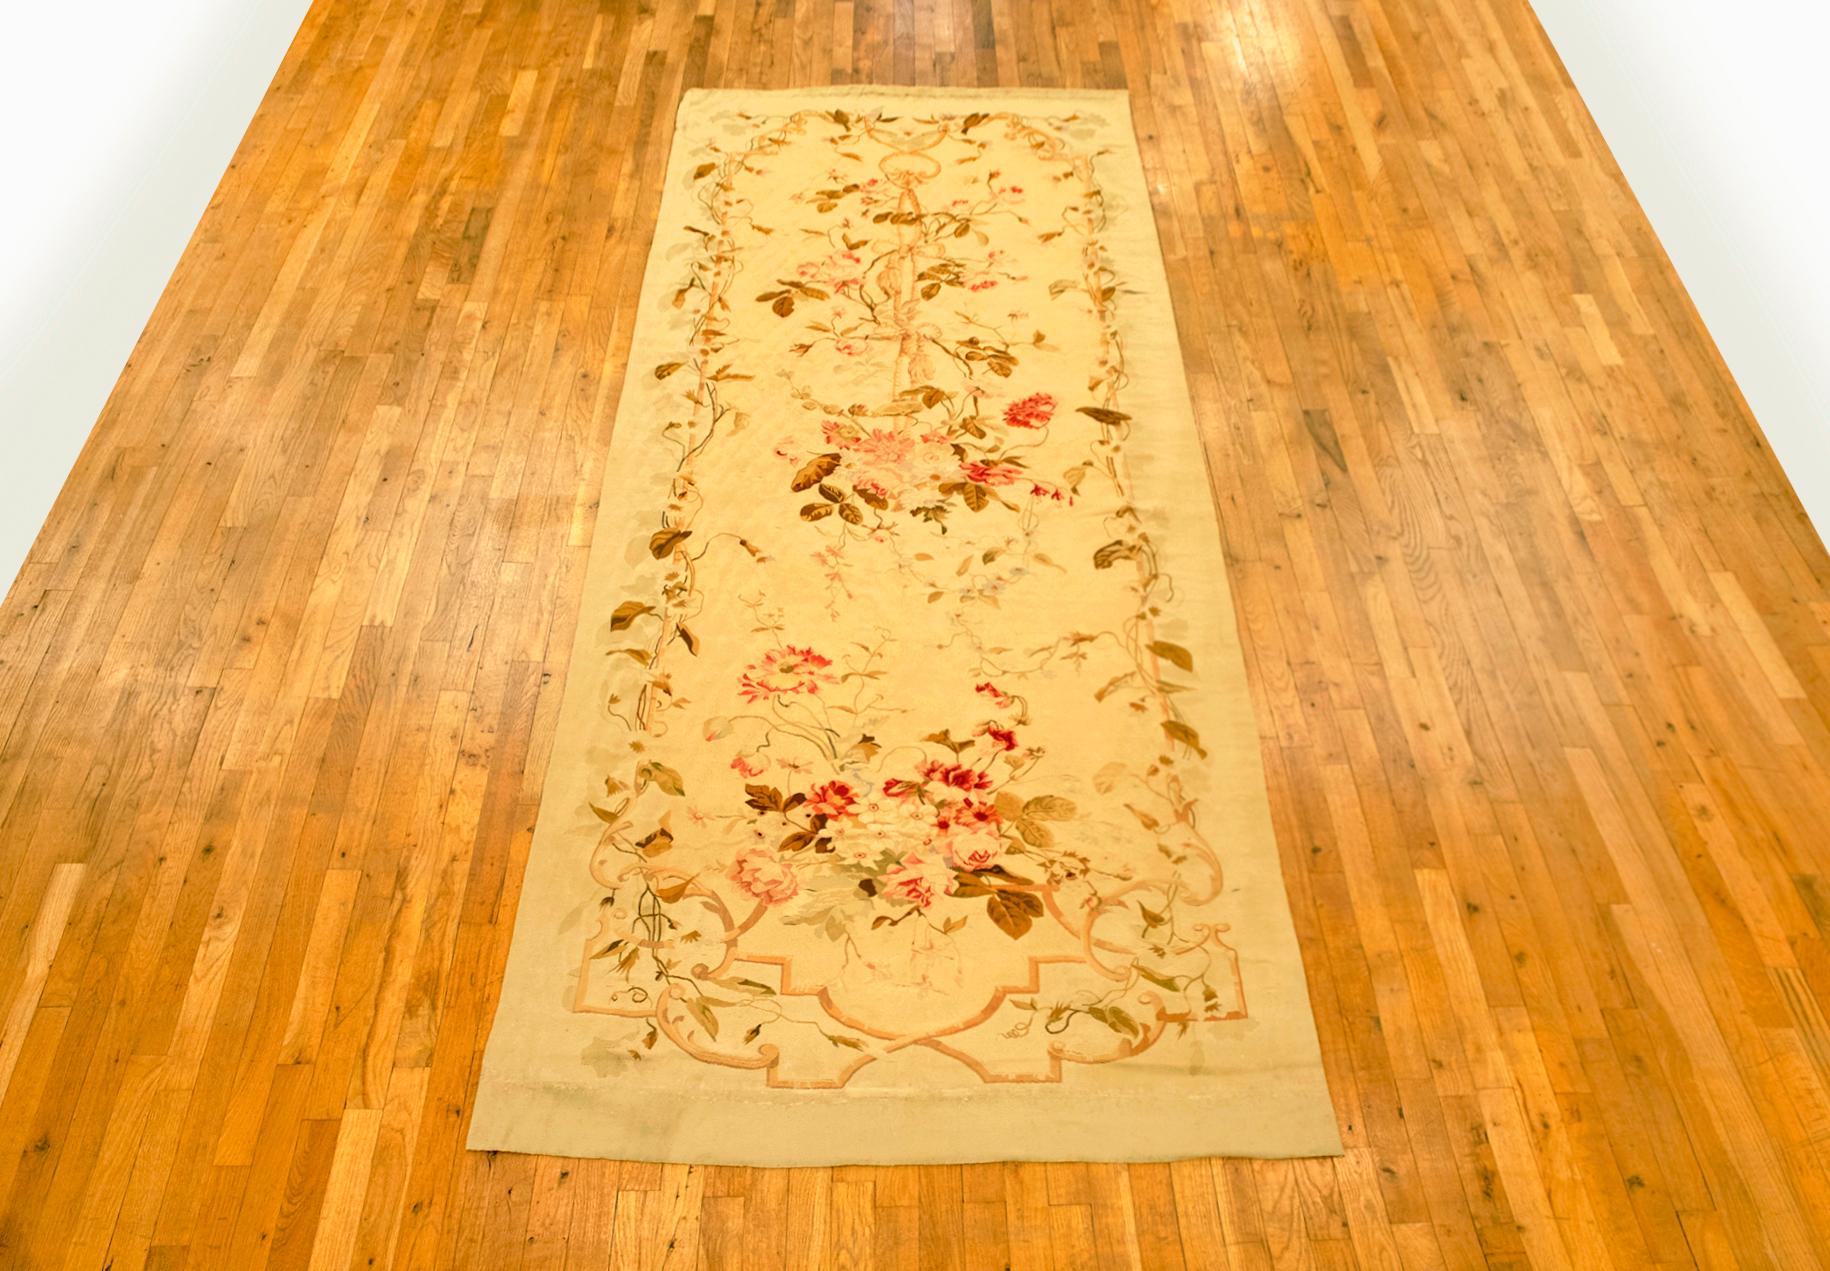 Antique French Aubusson rug, gallery size, circa 1890.

A one-of-a-kind antique French Aubusson Carpet, hand-knotted with soft wool pile. This lovely hand-knotted wool rug features floral elements in a directional design on the ivory primary field,